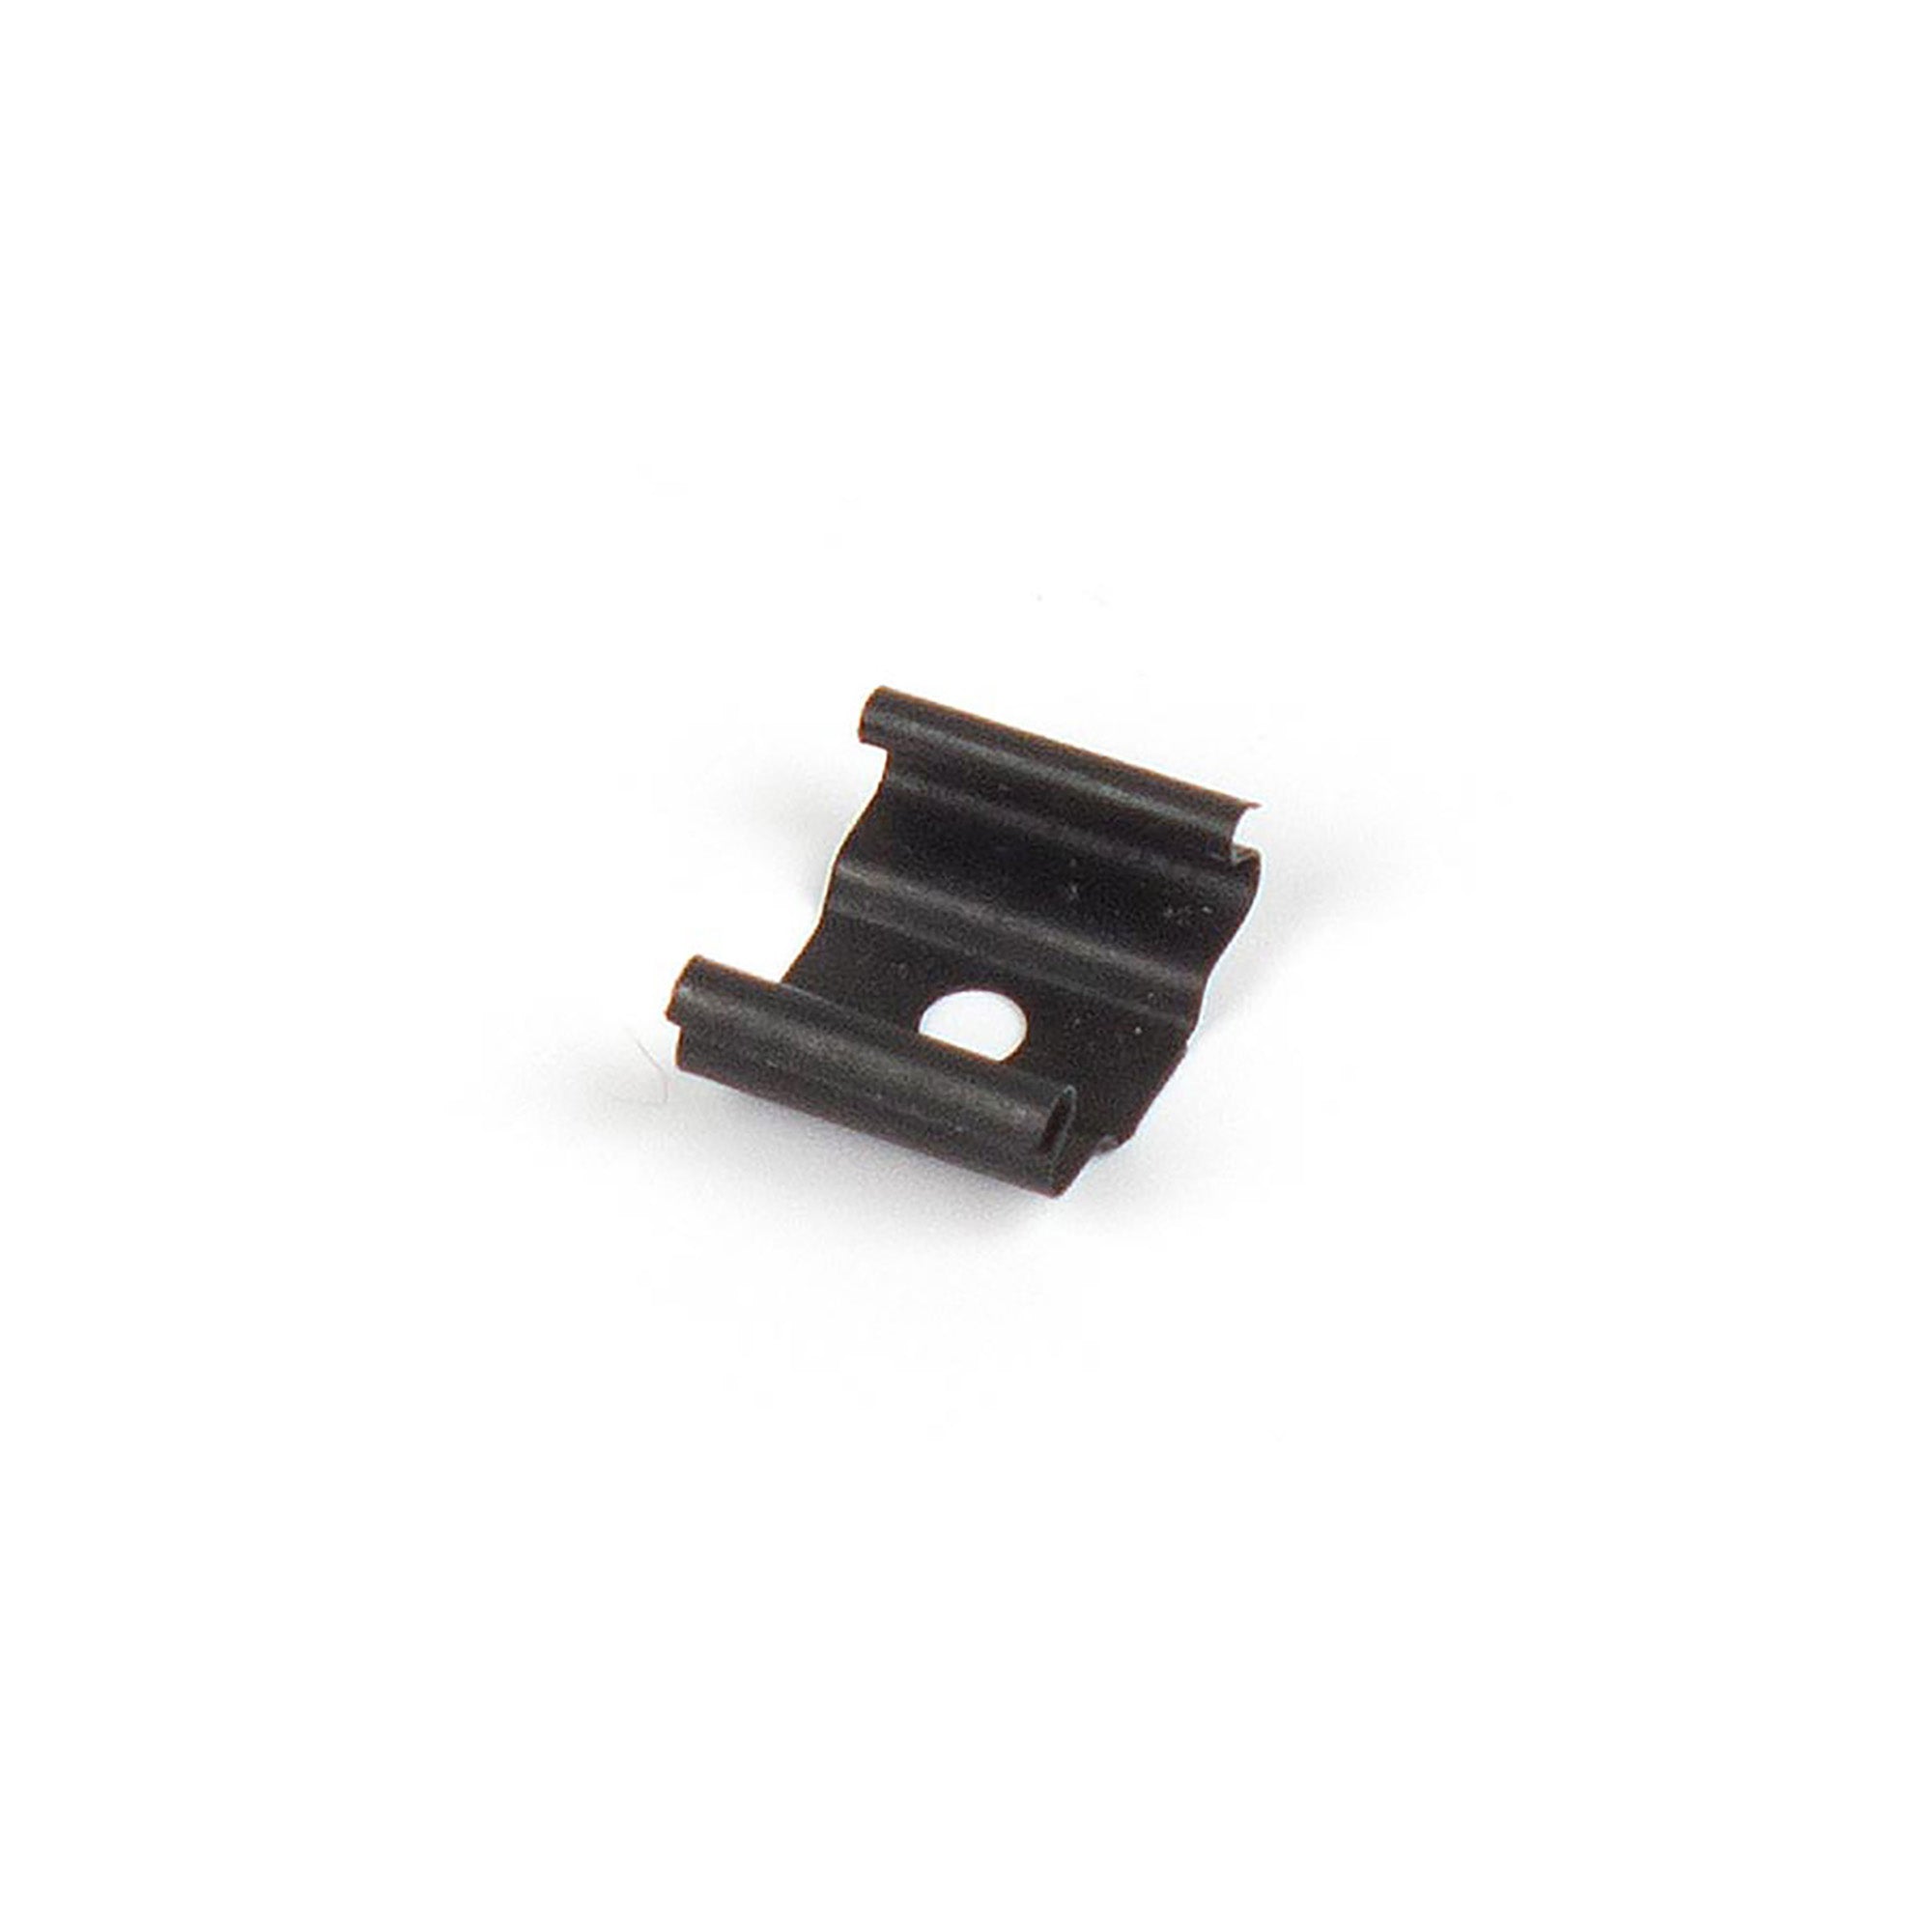 Under-Side Mounting Clip for 24V Outdoor PRO or RGB Strip Light